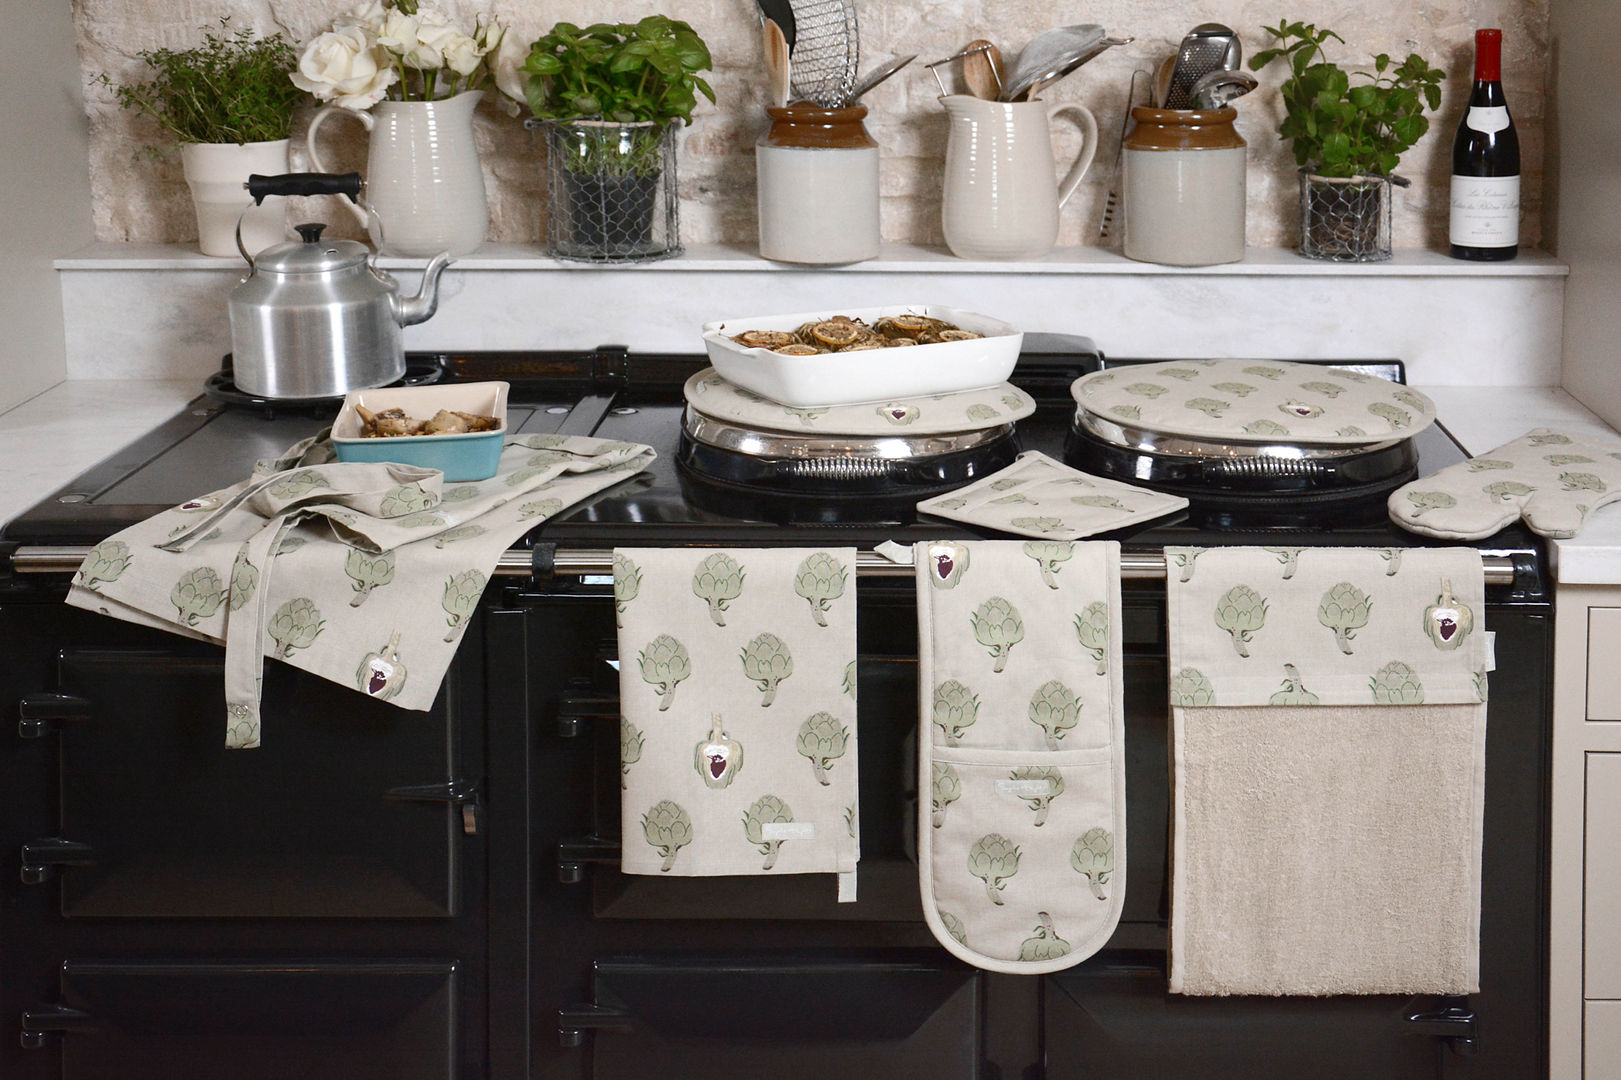 Artichoke Kitchen Collection homify Country style kitchen Cotton Red Accessories & textiles